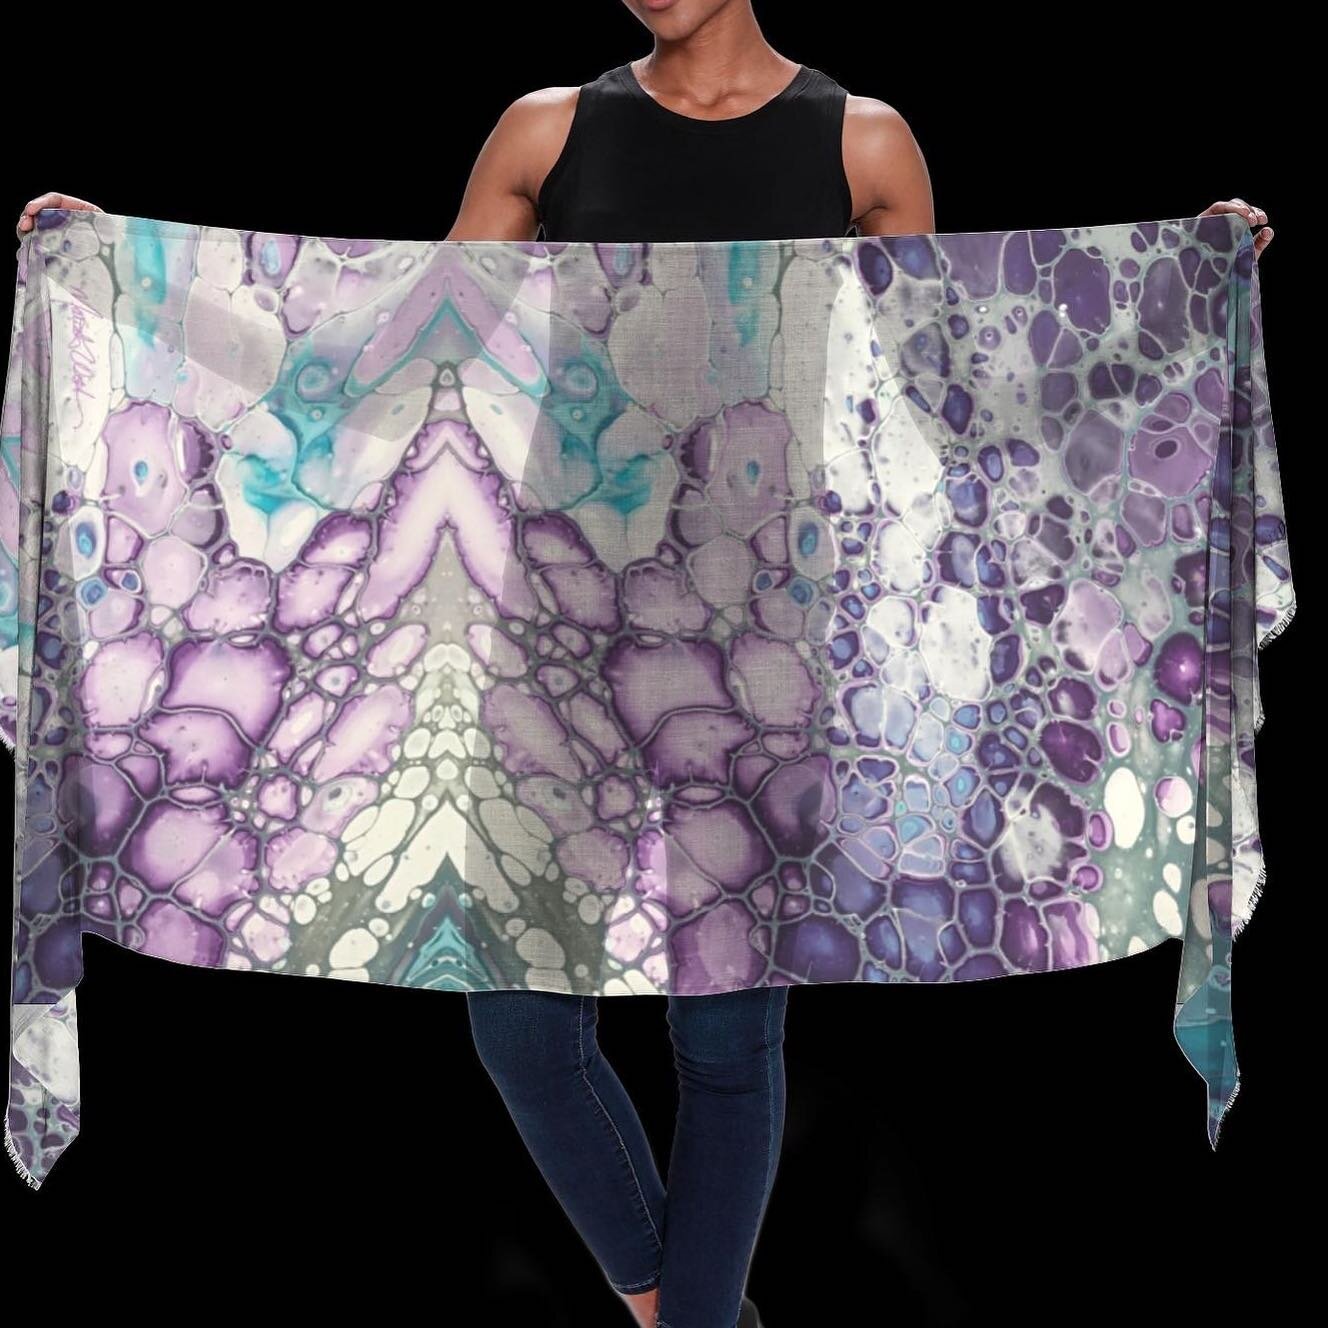 Art scarf: Shalom

This beautiful art scarf is based on the Aaronic blessing in Numbers 6. 

&ldquo;The Lord bless you and keep you; the Lord make his face to shine upon you and be gracious to you; the Lord lift up his countenance upon you and wrap y